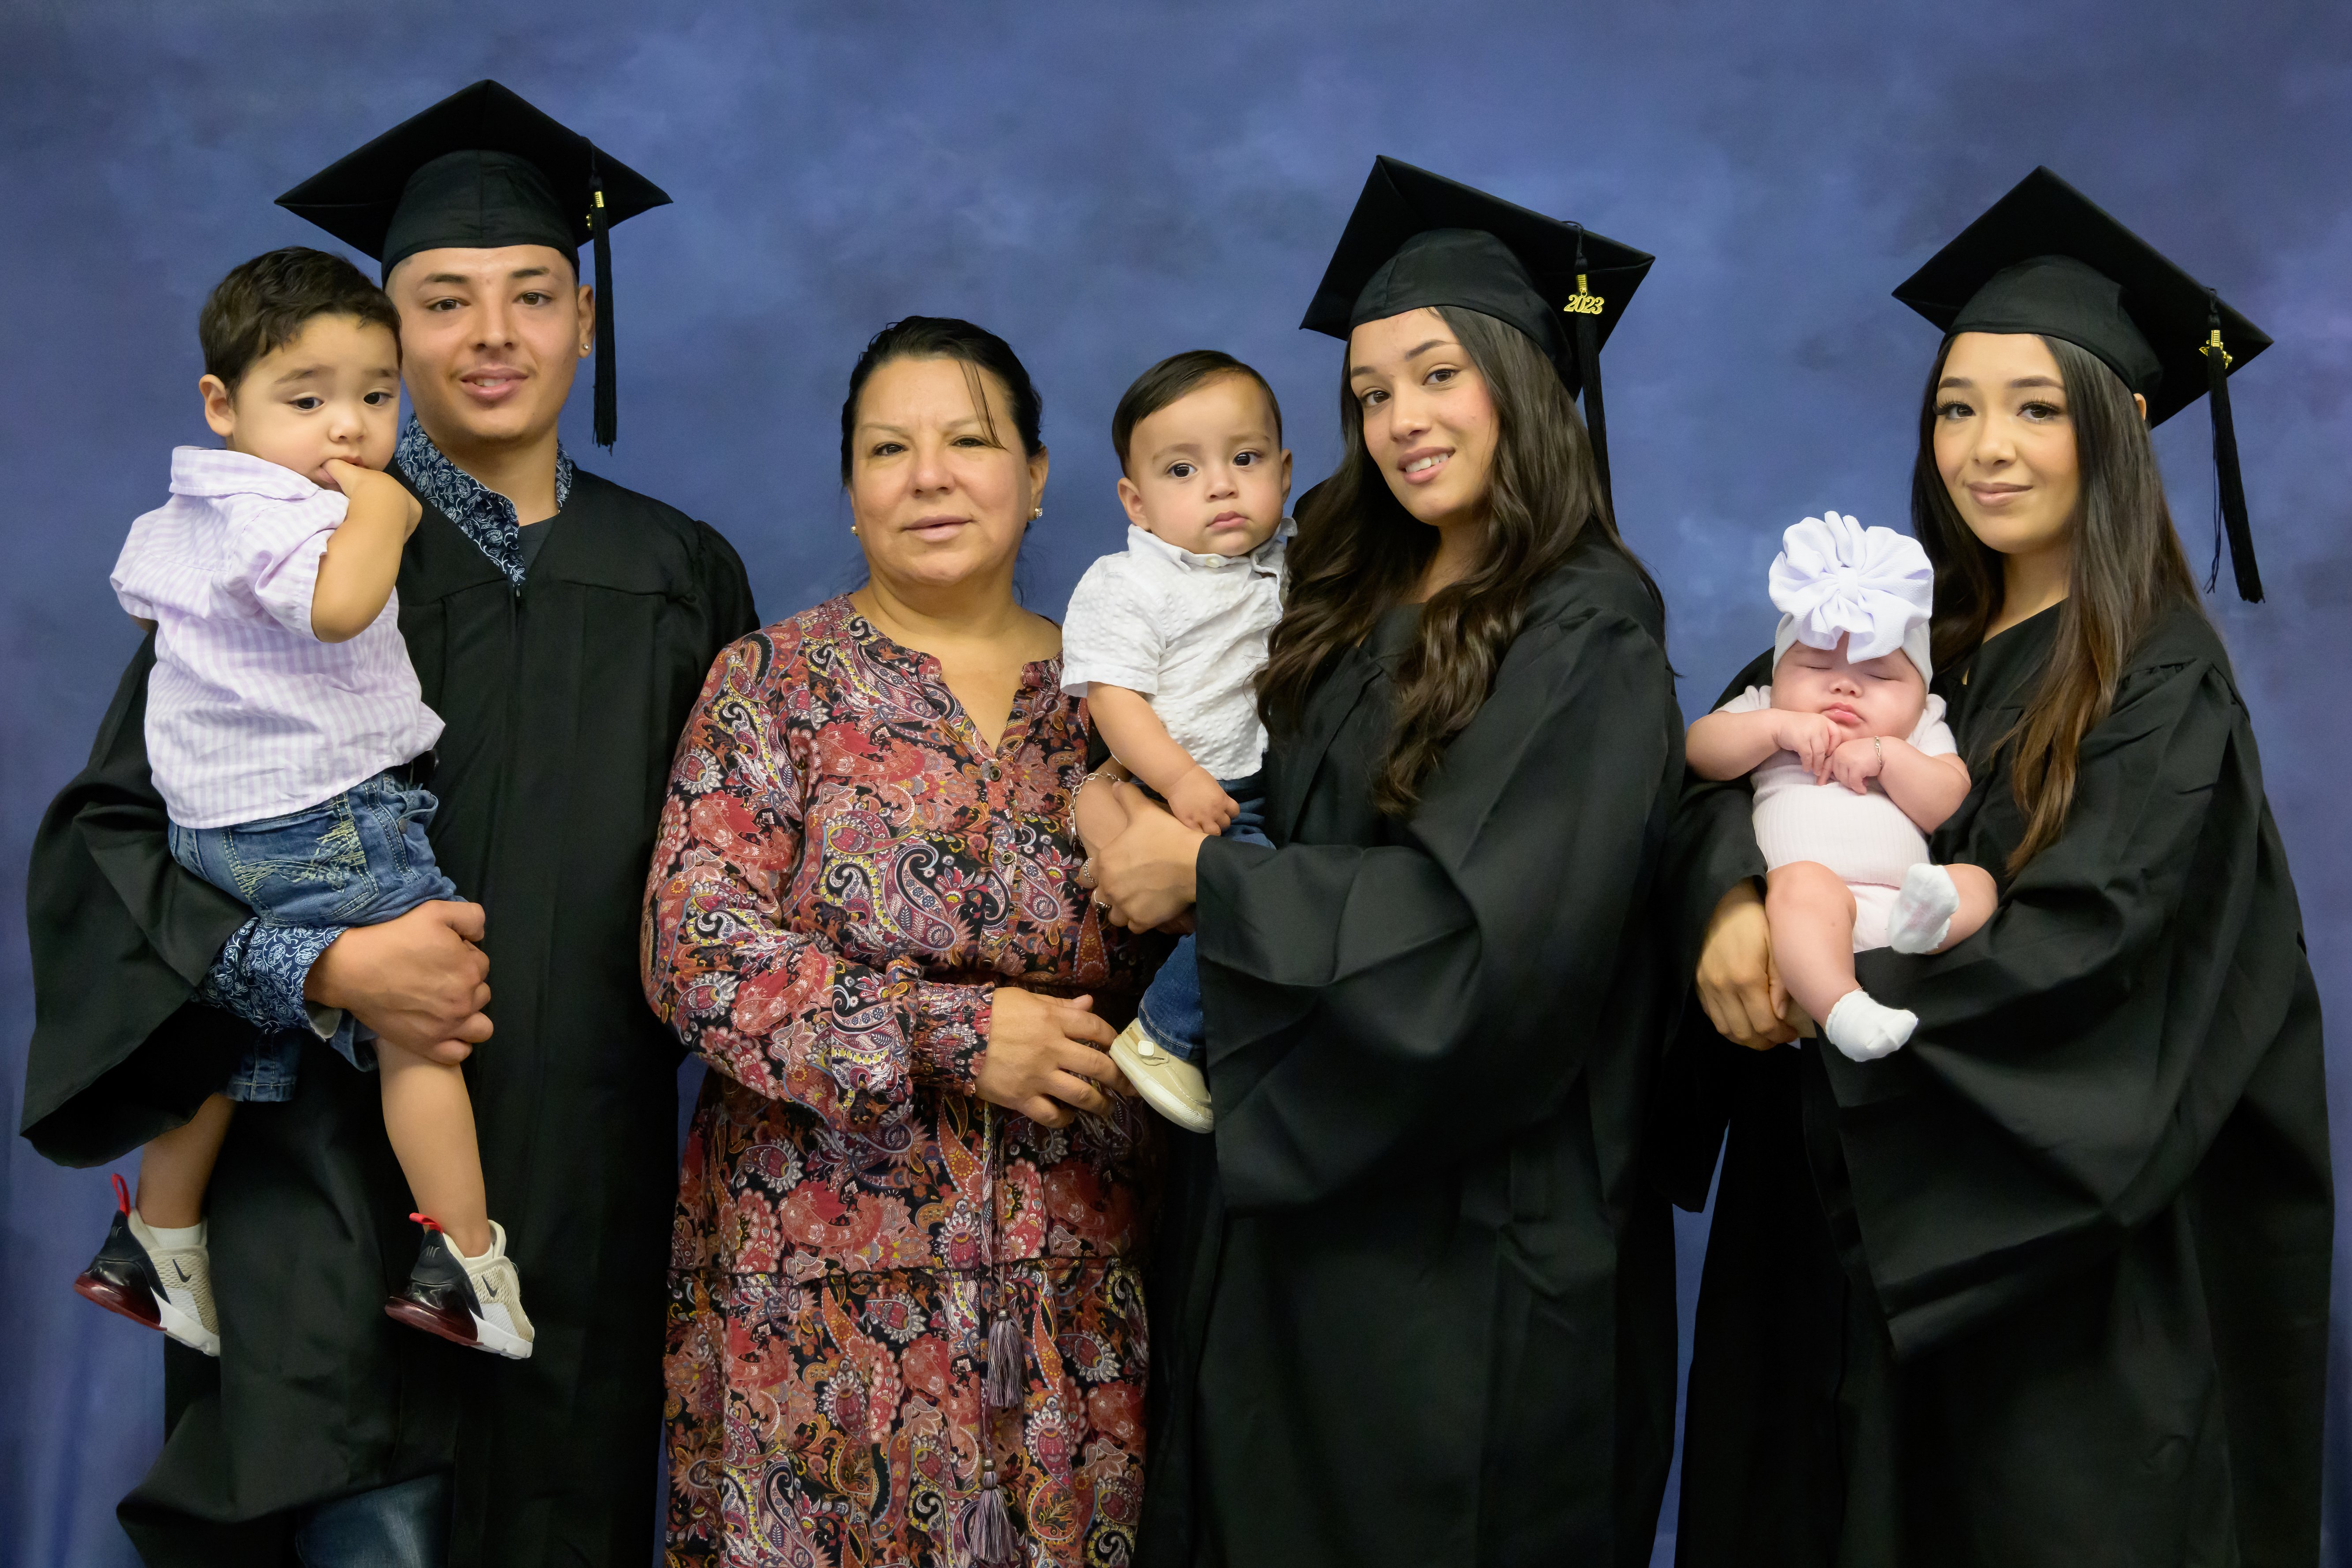 3 siblings pose with their mom and babies for graduation photo.